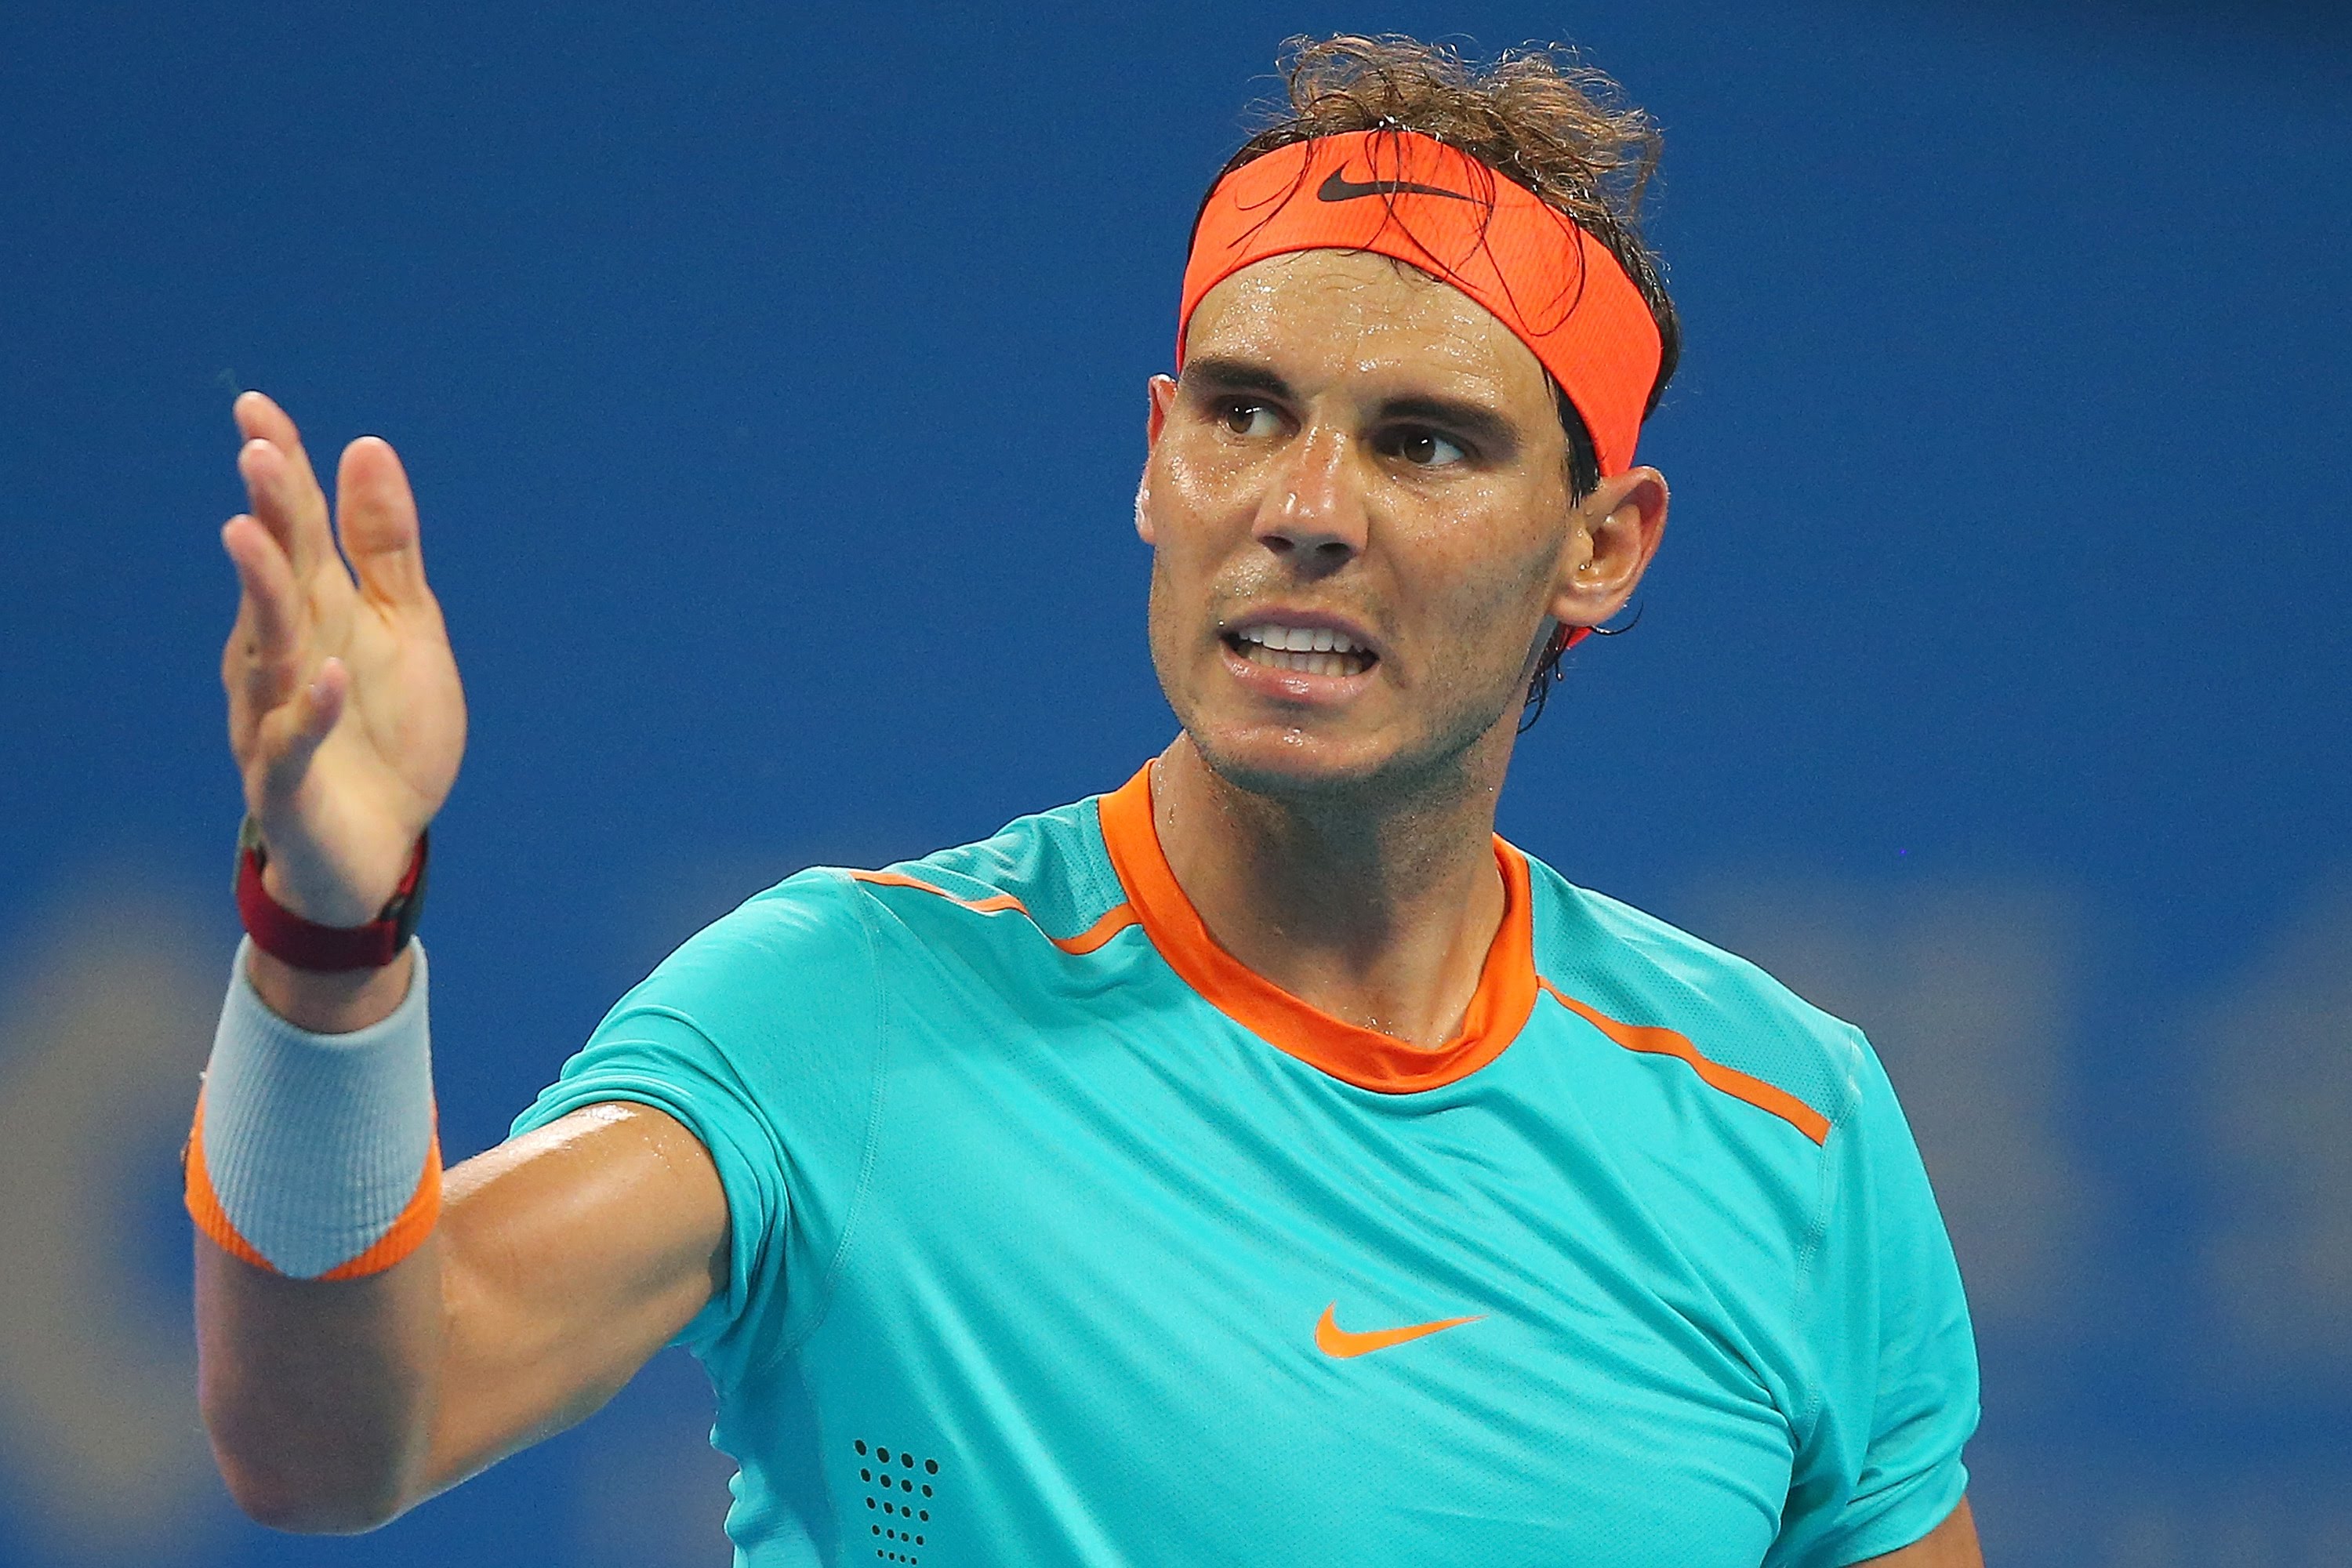 Rafael Nadal Pushes For Tighter Drug Control